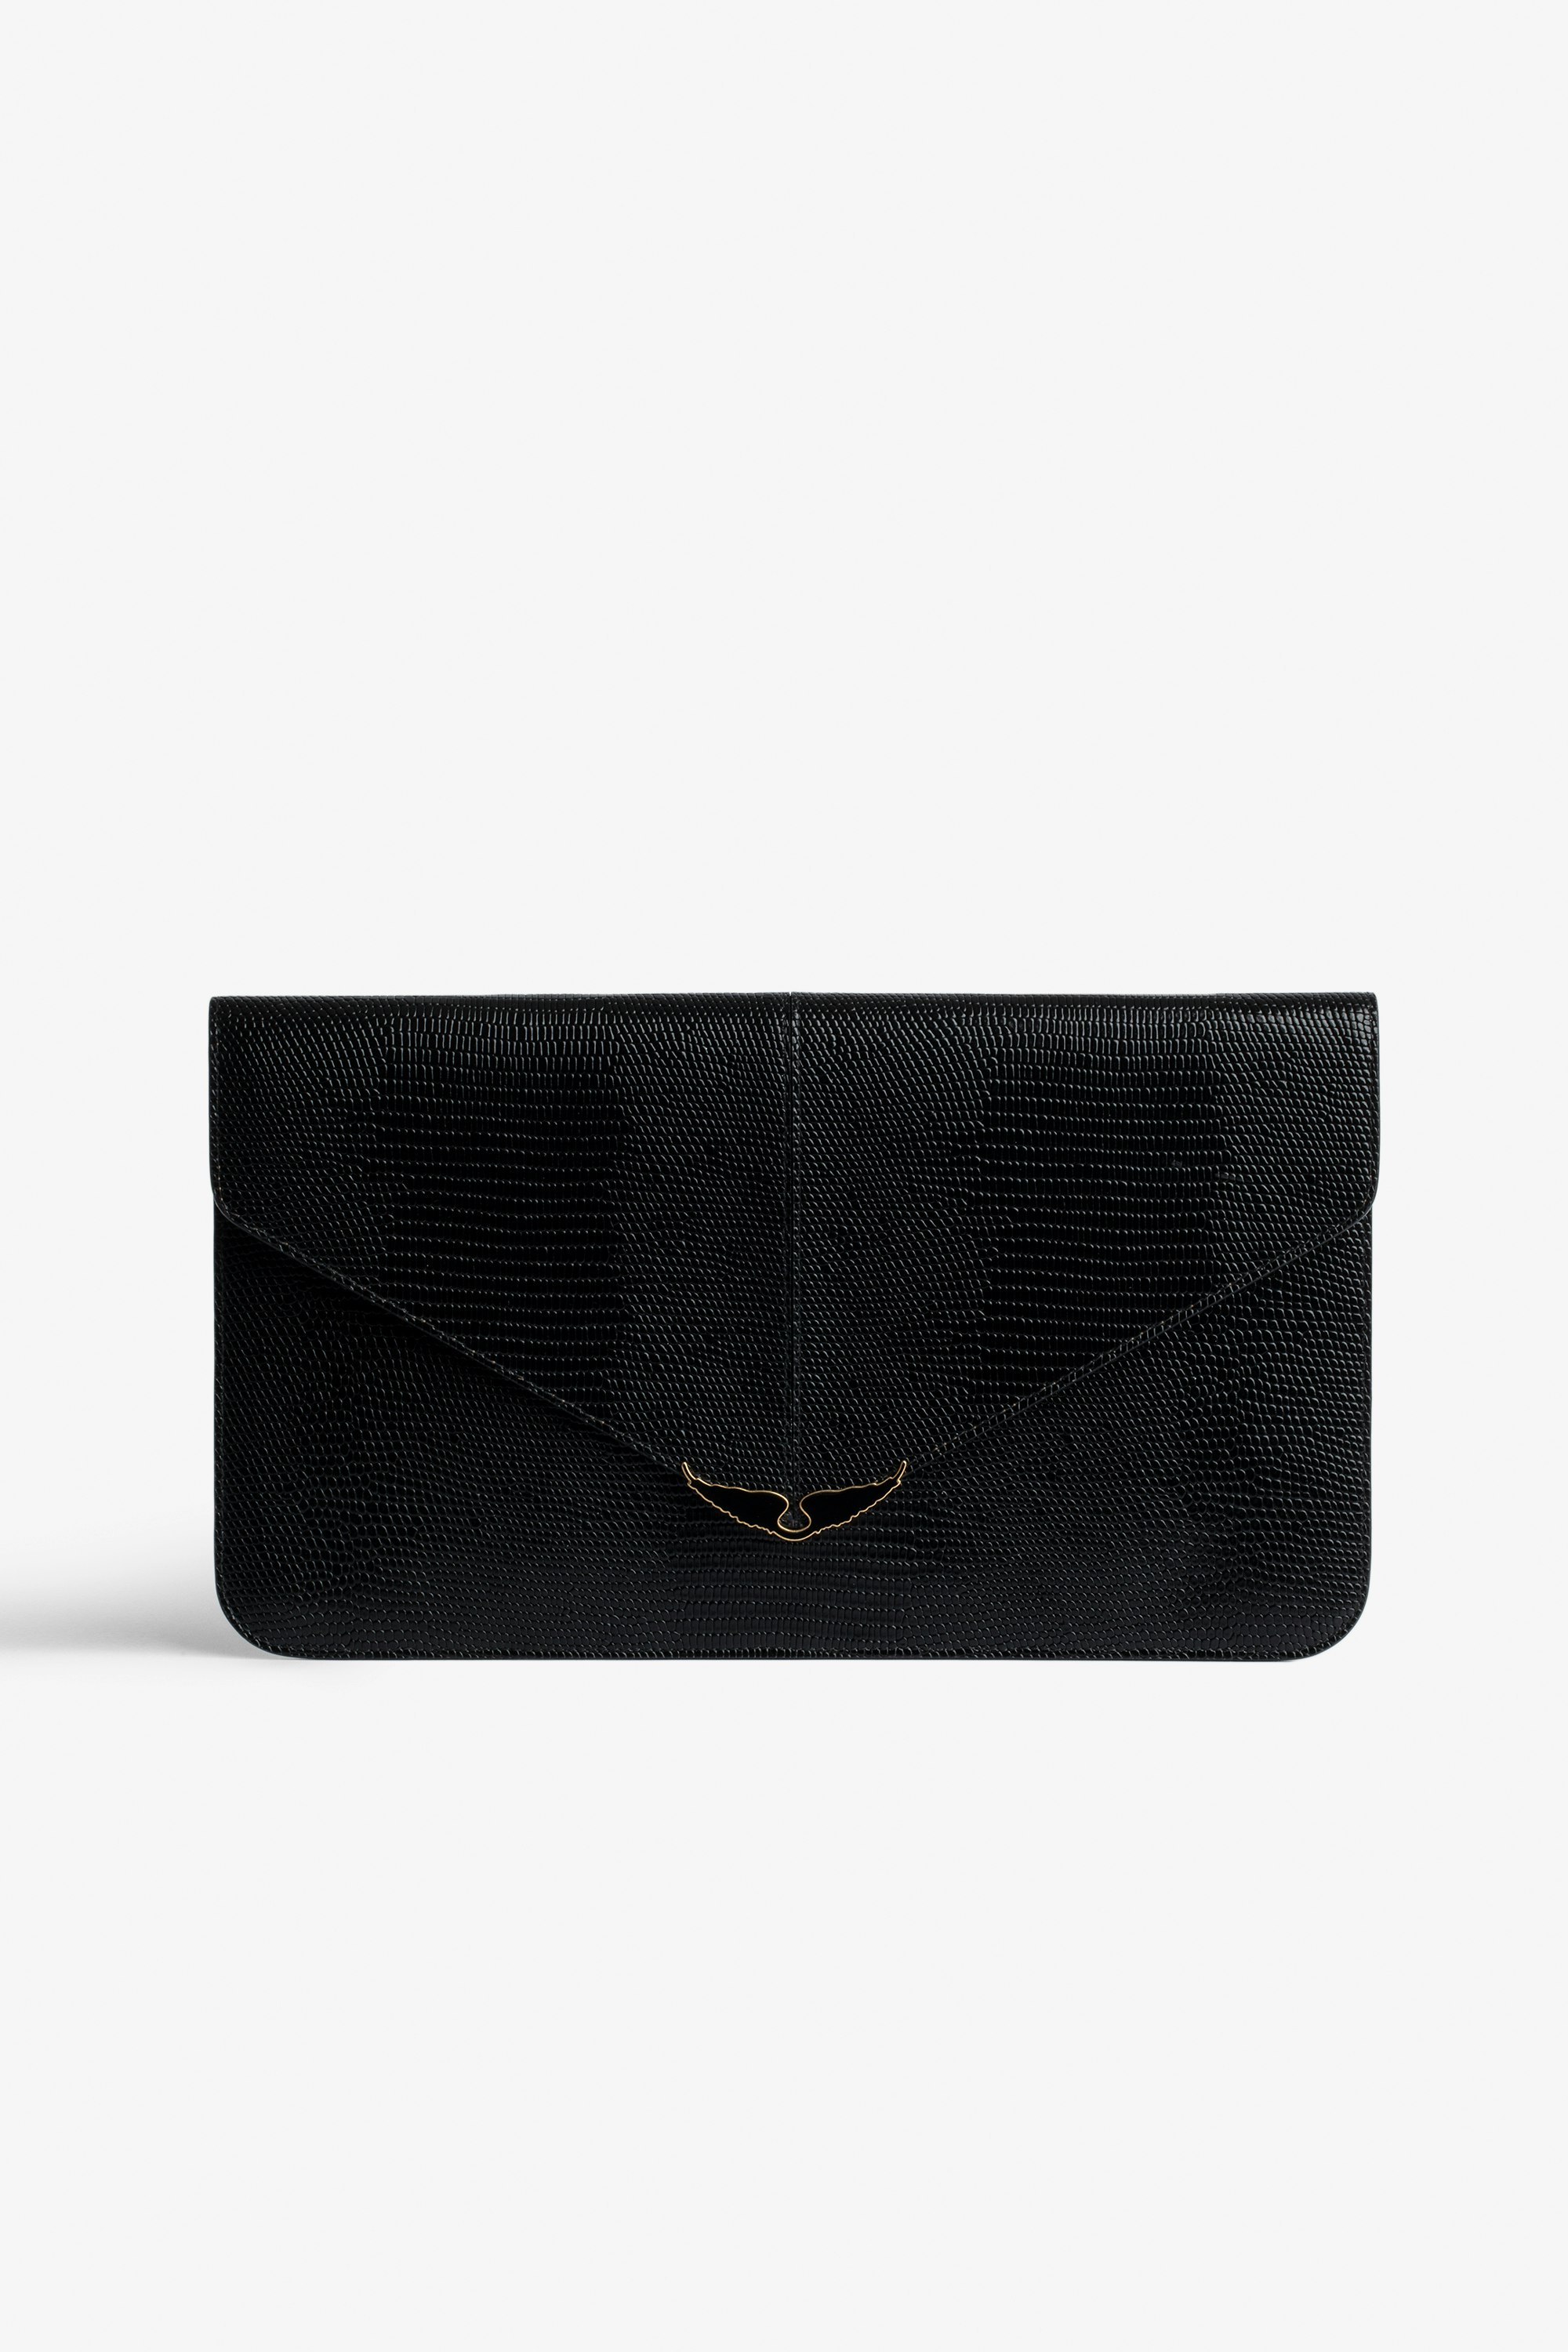 Borderline Pouch - Women’s envelope clutch in shiny black leather with embossed iguana, khaki suede interior, and black lacquered wings on the clasp.